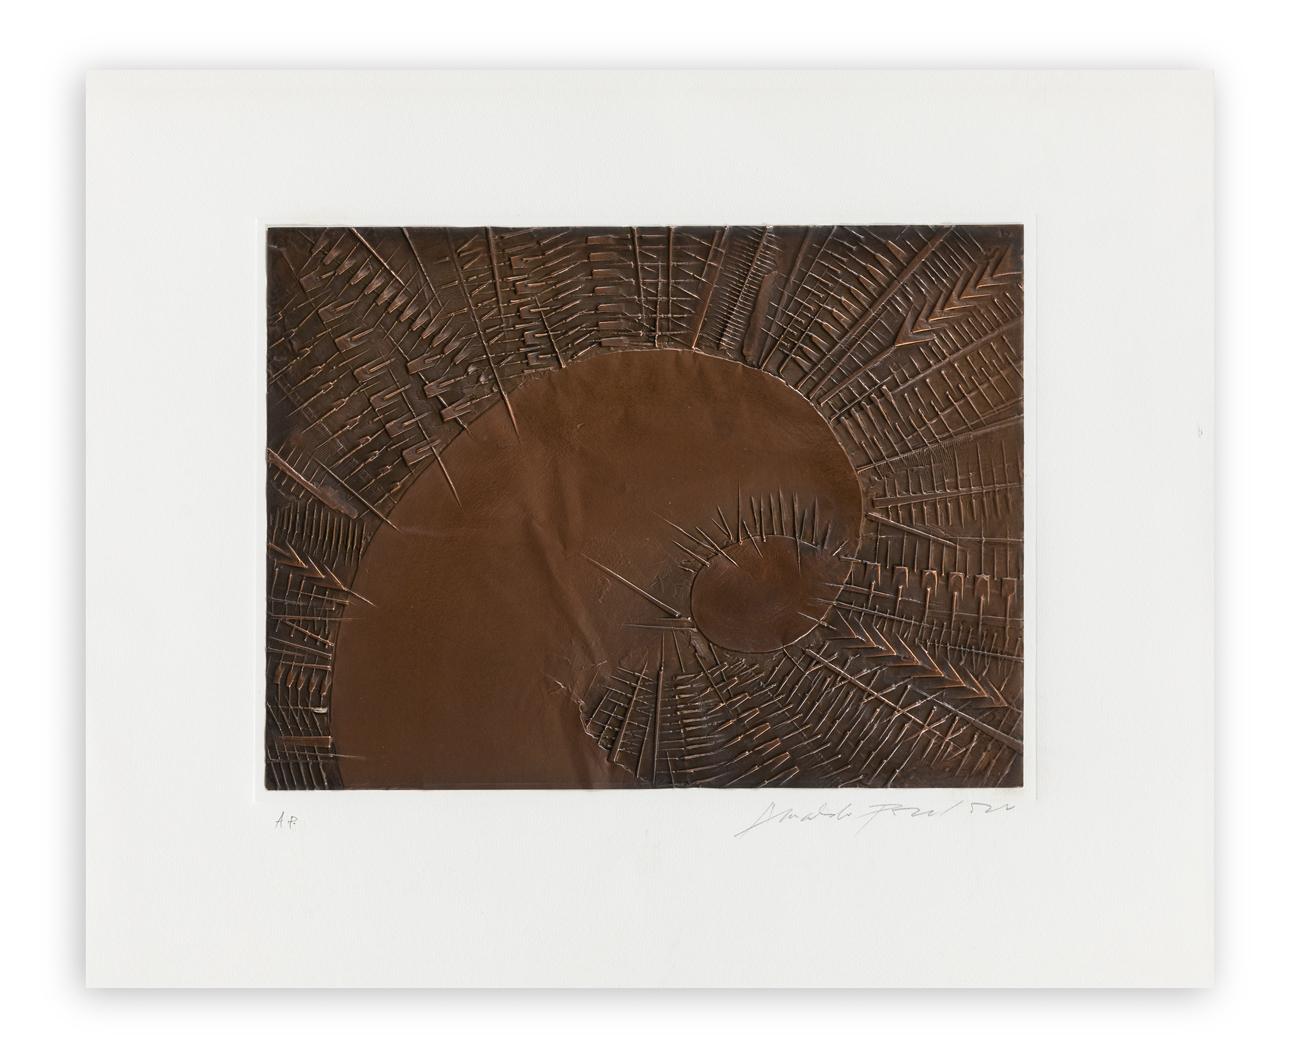 embossed oxidized copper sheet applied to handmade paper
Limited edition of 100 copies
signed in pencil by artist lower right and numbered as AP ( artist proof ) lower left
Cooper size: 30 x 40 cm
paper size: 50 x 60 cm

Excellent conditions

We